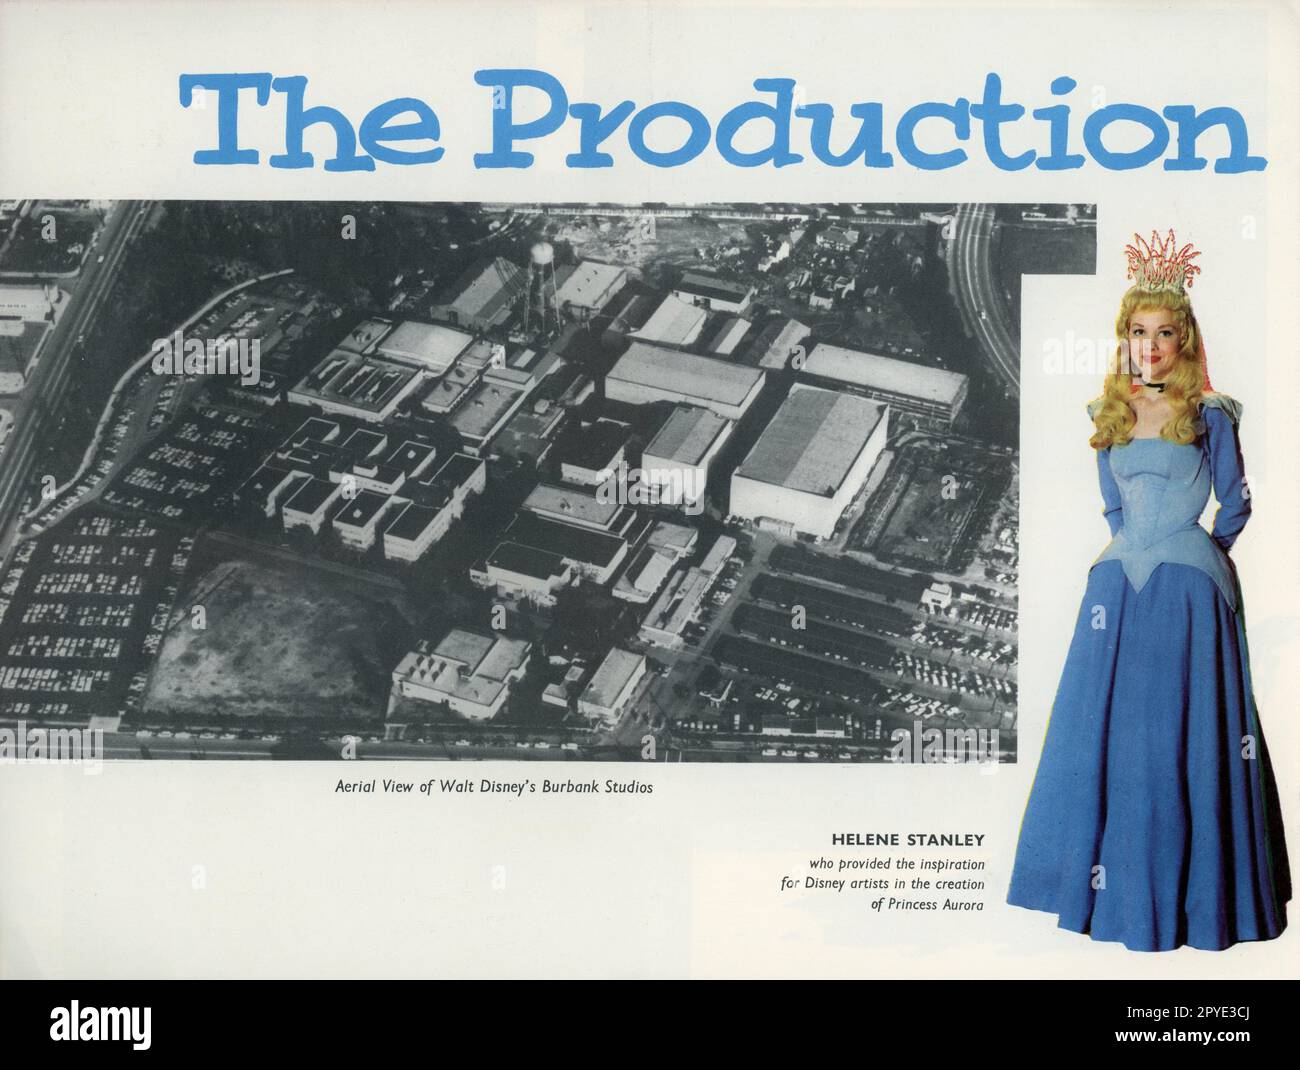 Walt Disney Burbank Studios aerial view and HELENE STANLEY as the live action model for Princess Aurora in WALT DISNEY'S SLEEPING BEAUTY 1959 supervising director CLYDE GERONIMI story Charles Perrault songs and score adapted from the ballet music by Tchaikovsky Walt Disney Productions Stock Photo